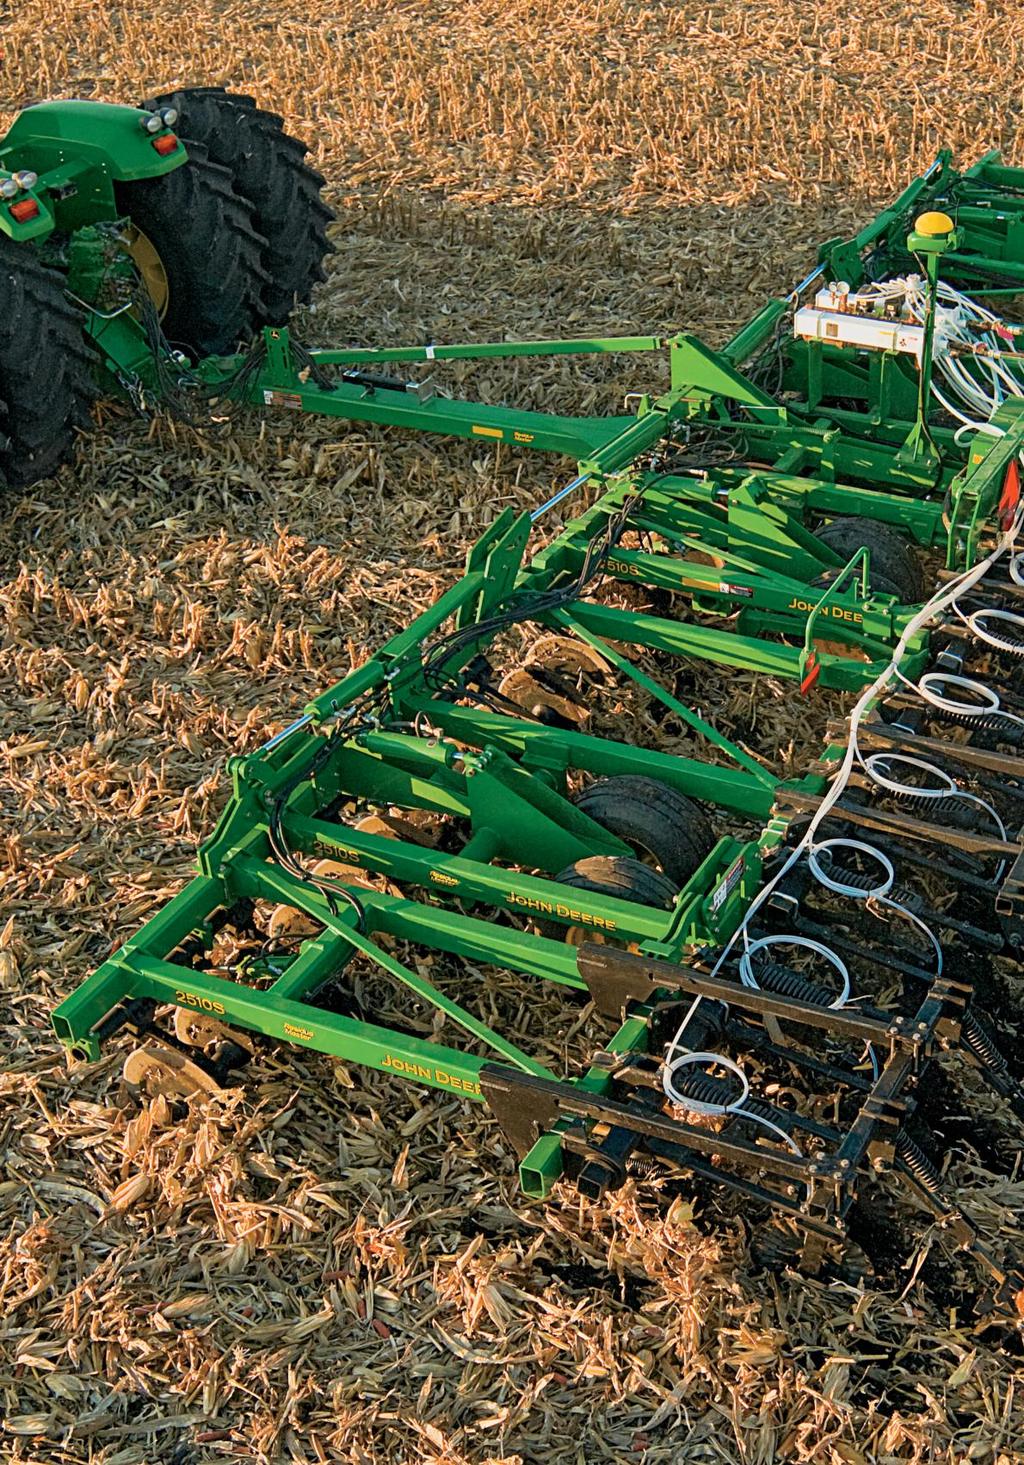 2510S Strip-Till Applicator 2510S Nutrient Applicator Reliable one-pass coverage.